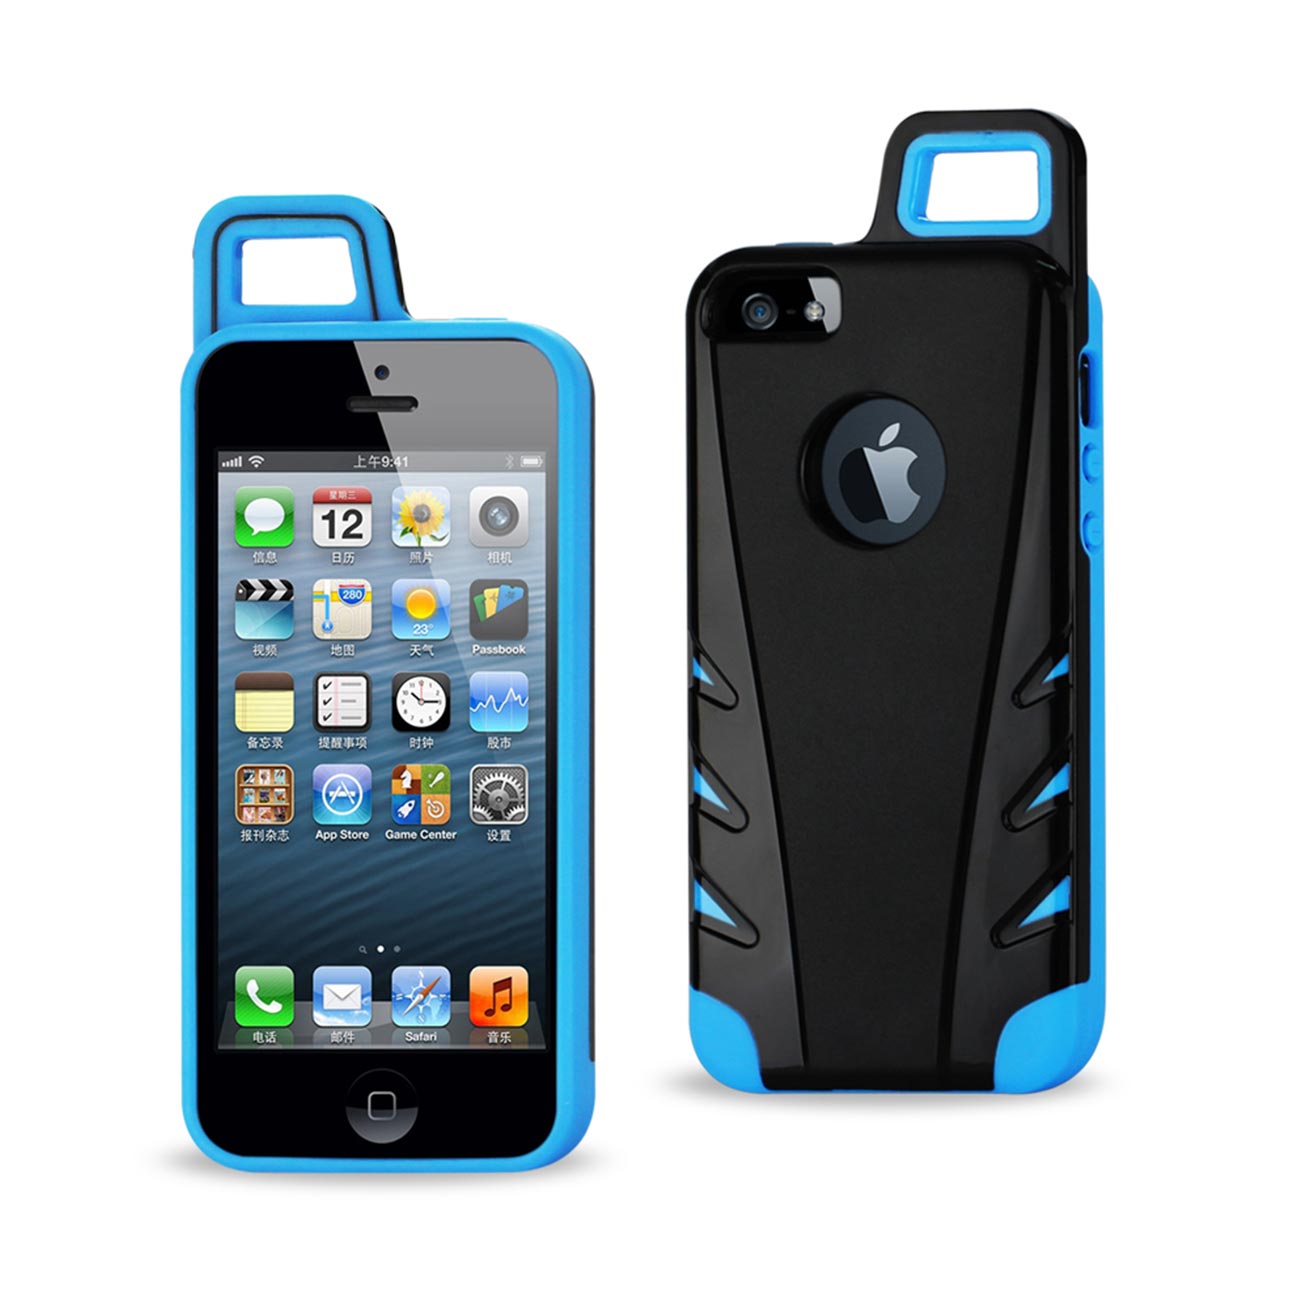 Case Hybrid Drop Proof Workout With Hook iPhone 5/ 5S/ SE Black Navy Color